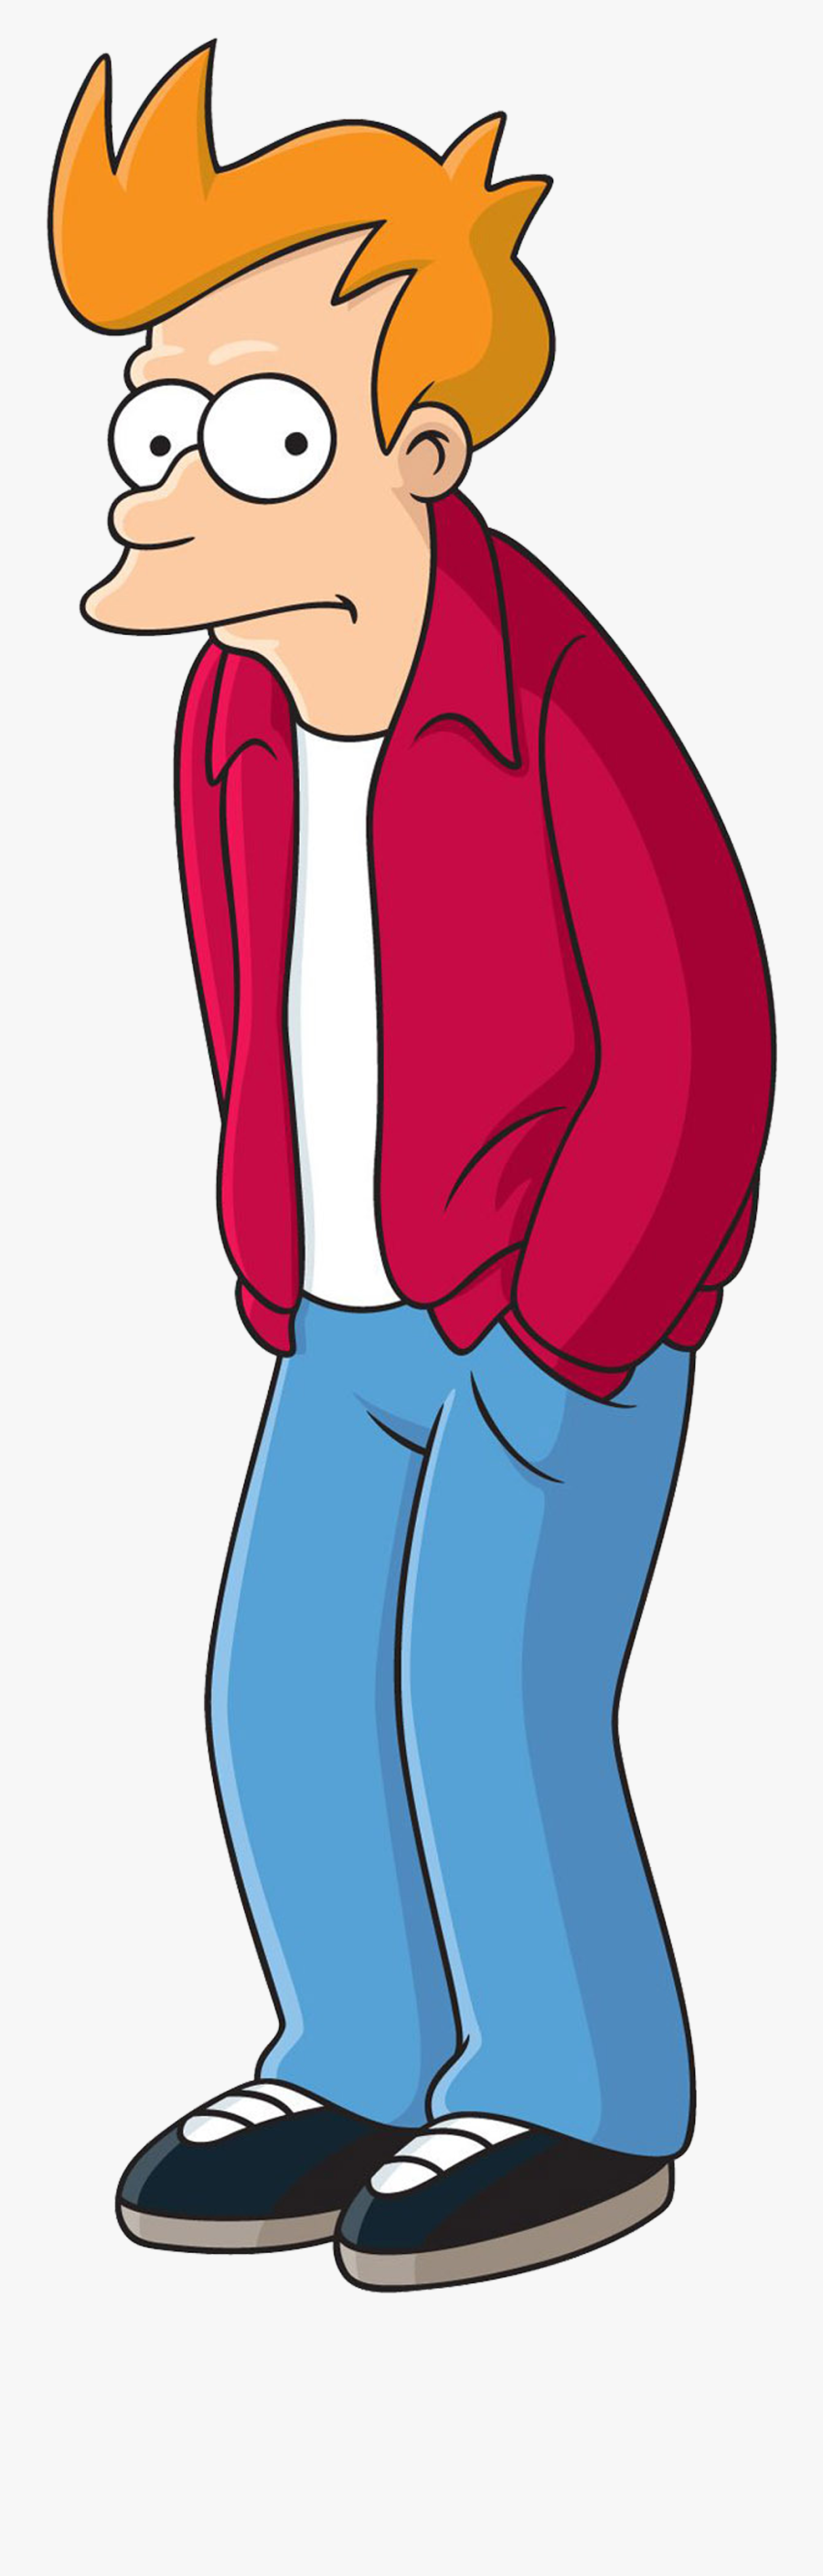 Matt Groening"s Collection - Philip J Fry Real Life, Transparent Clipart